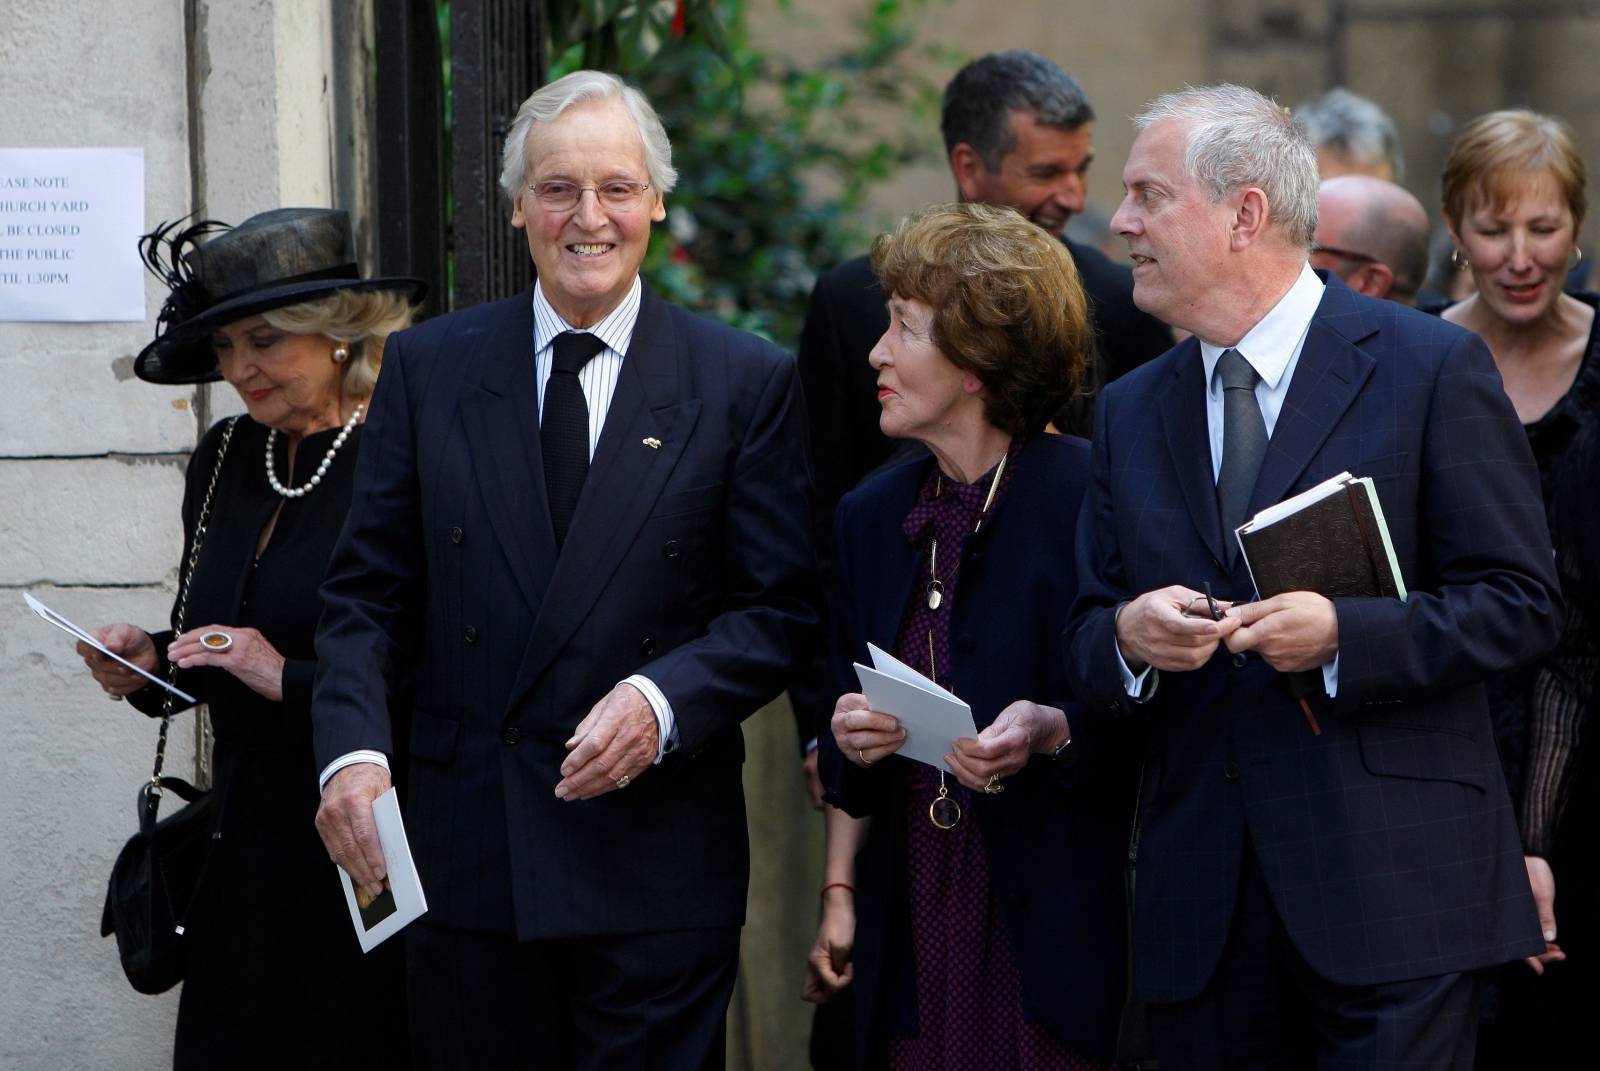 FILE PHOTO: British entertainers Nicholas Parsons and Gyles Brandreth leave the funeral of Clement Freud at St Bride's church in London